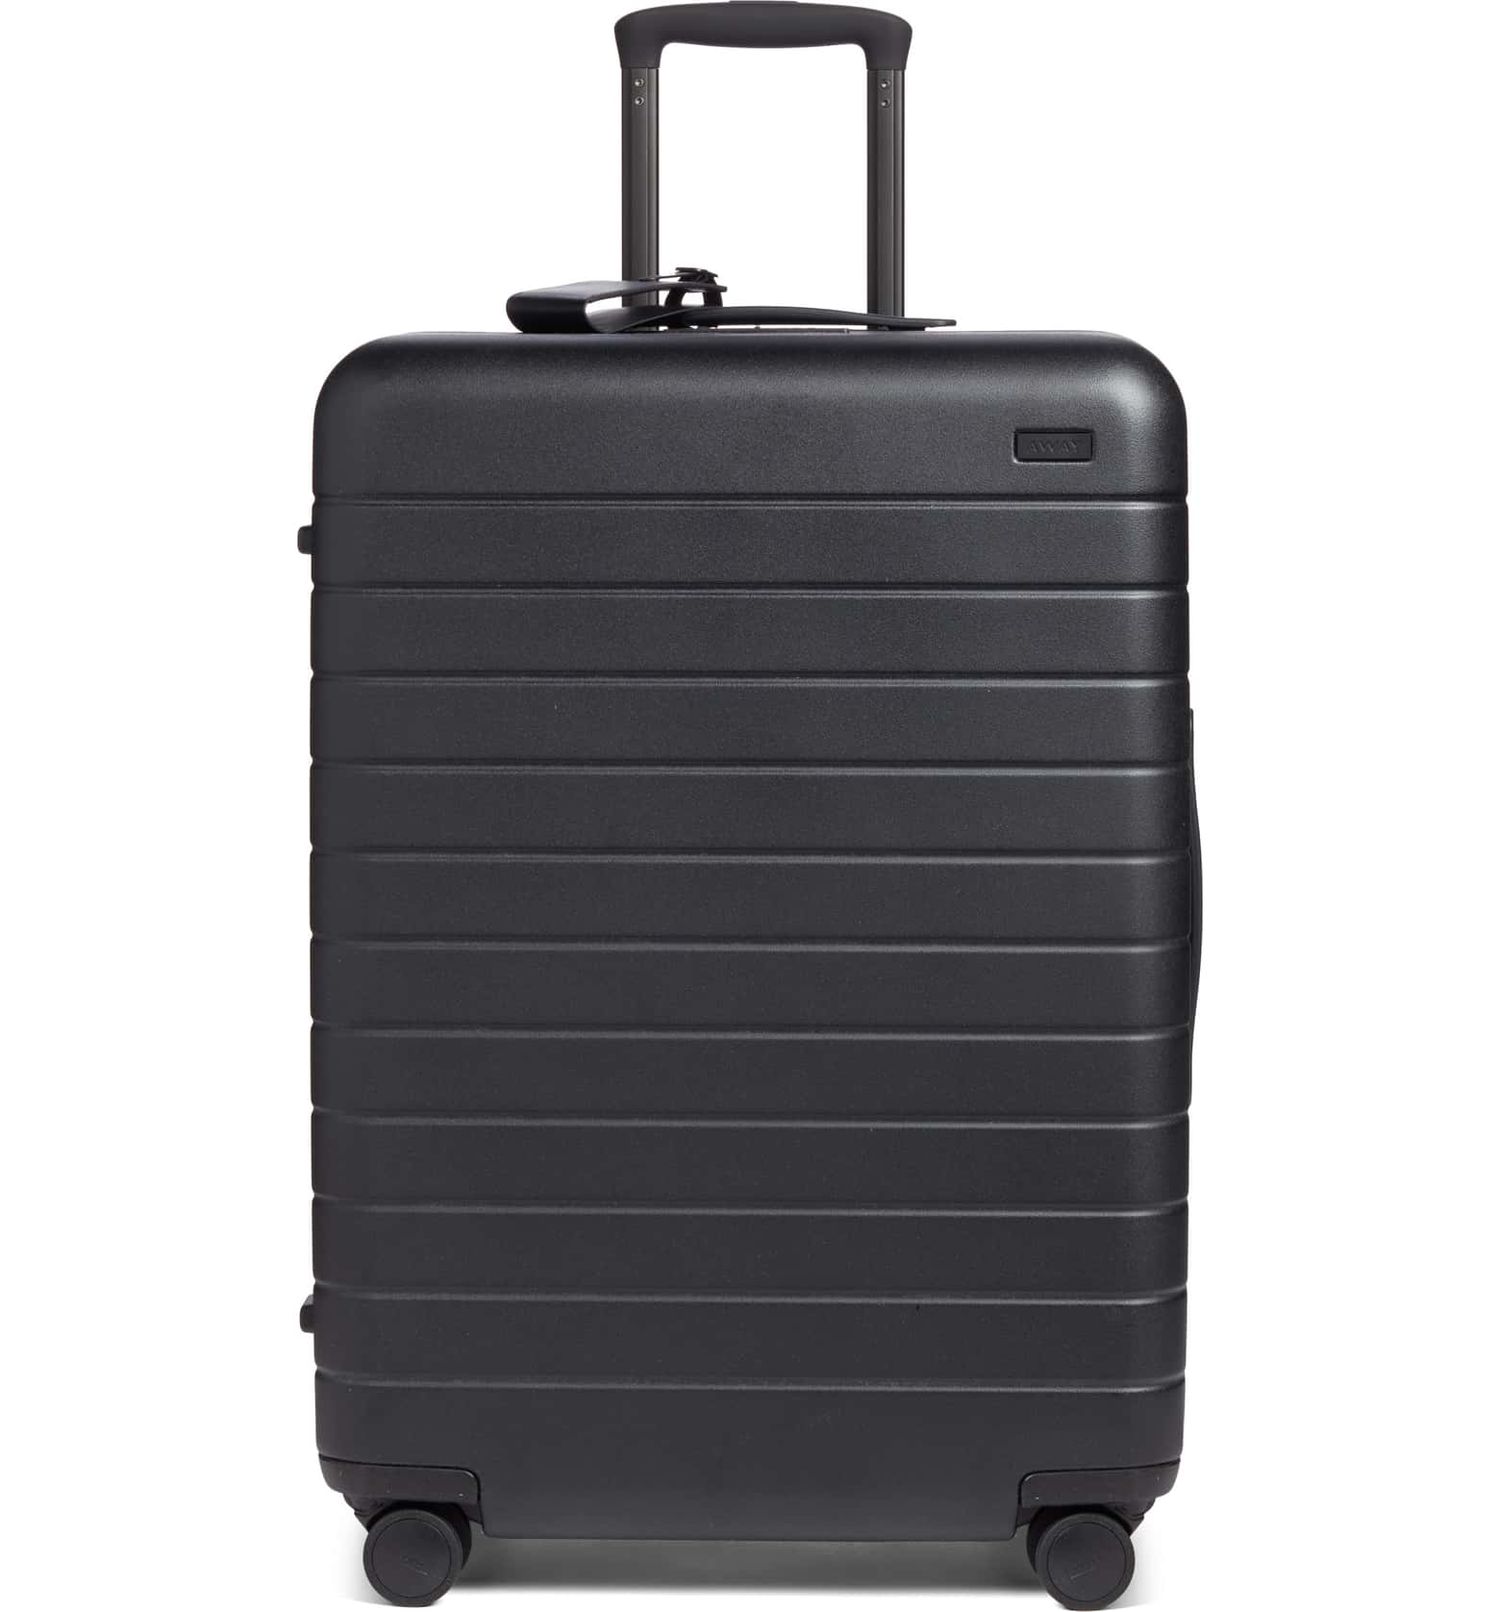 Away Launches Three New Suitcase Colors Exclusively on Nordstrom |  PEOPLE.com